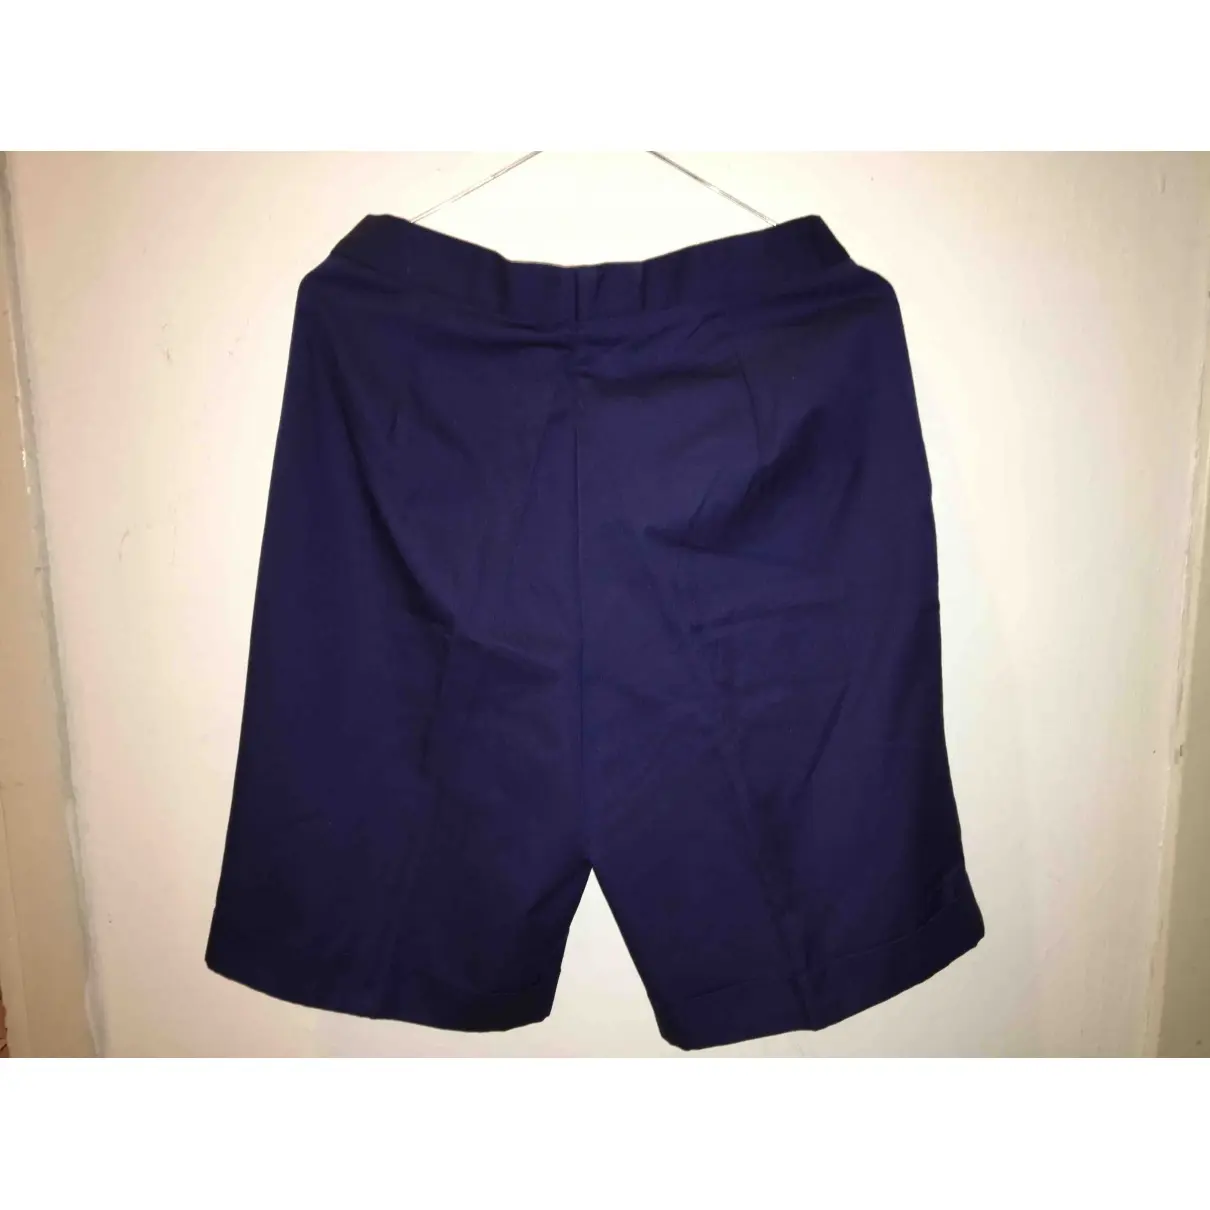 Adidas Short for sale